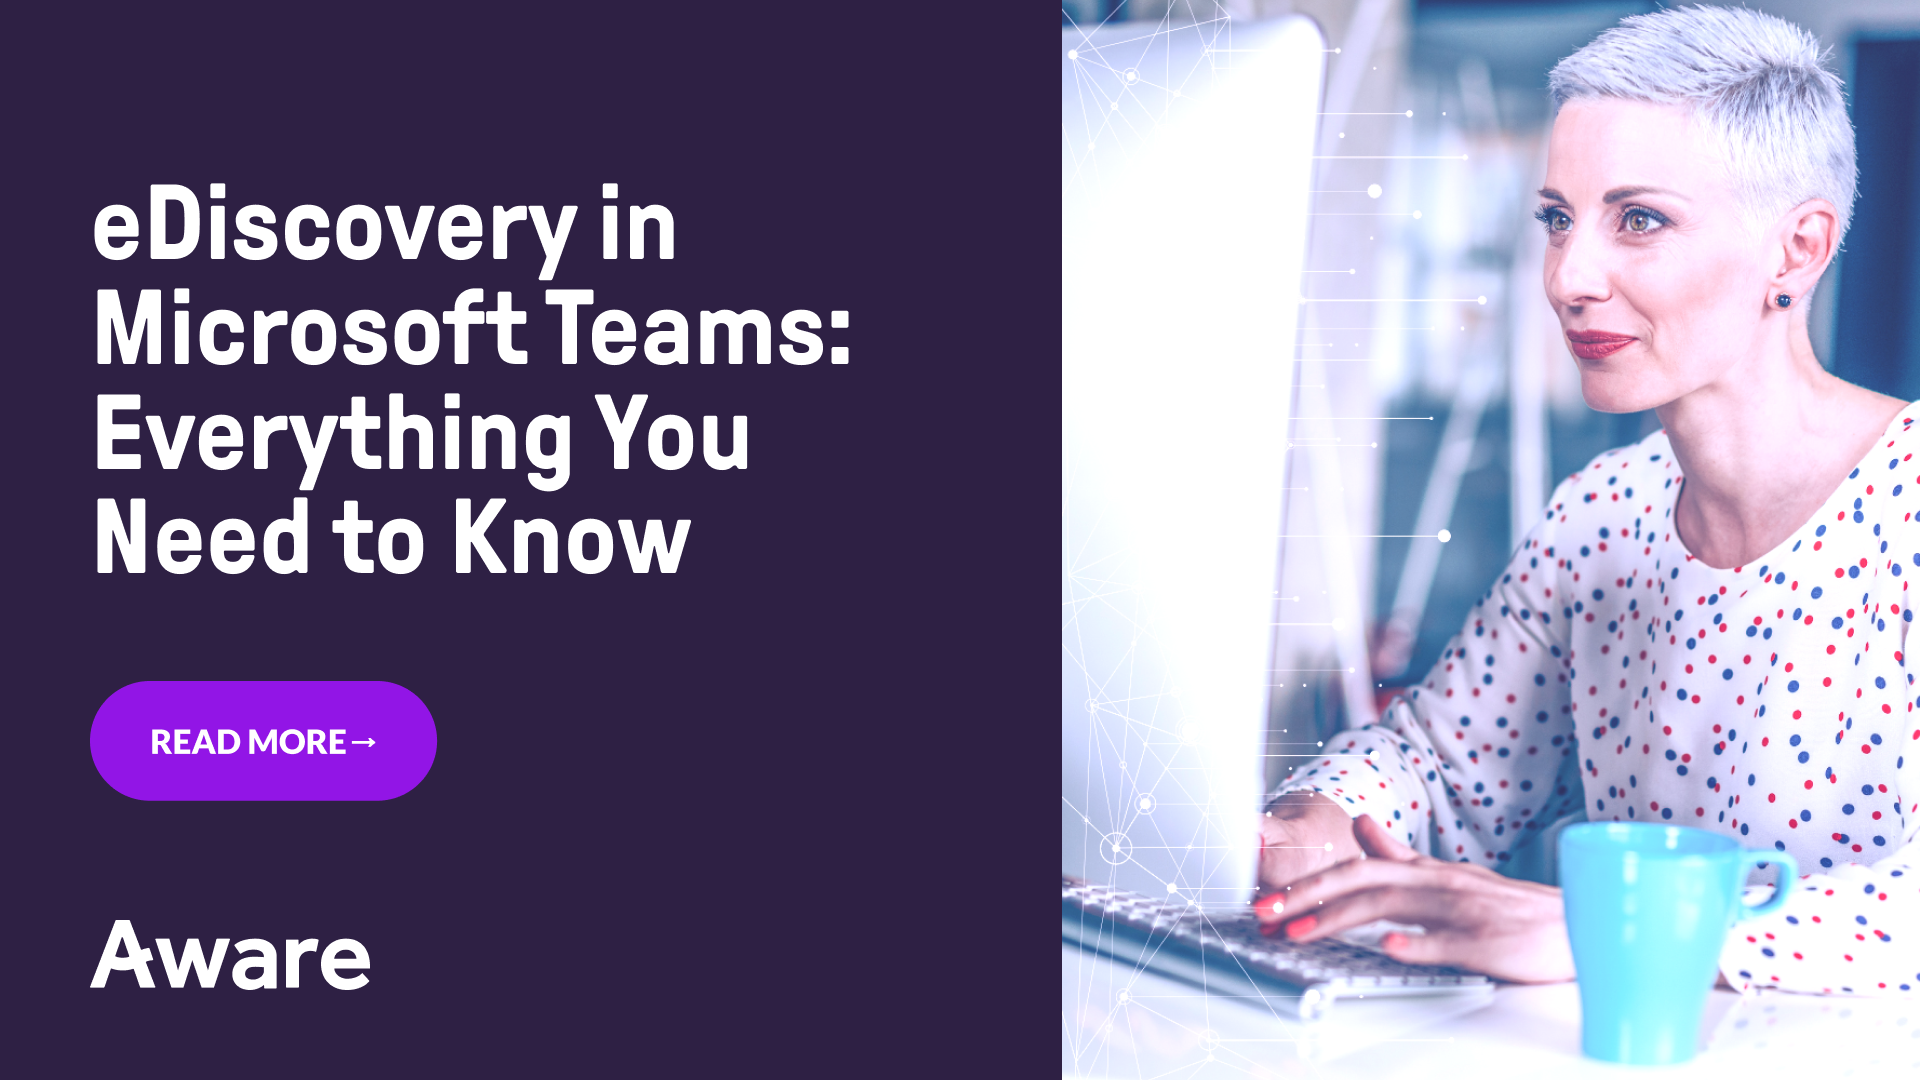 eDiscovery in Microsoft Teams: Everything You Need to Know